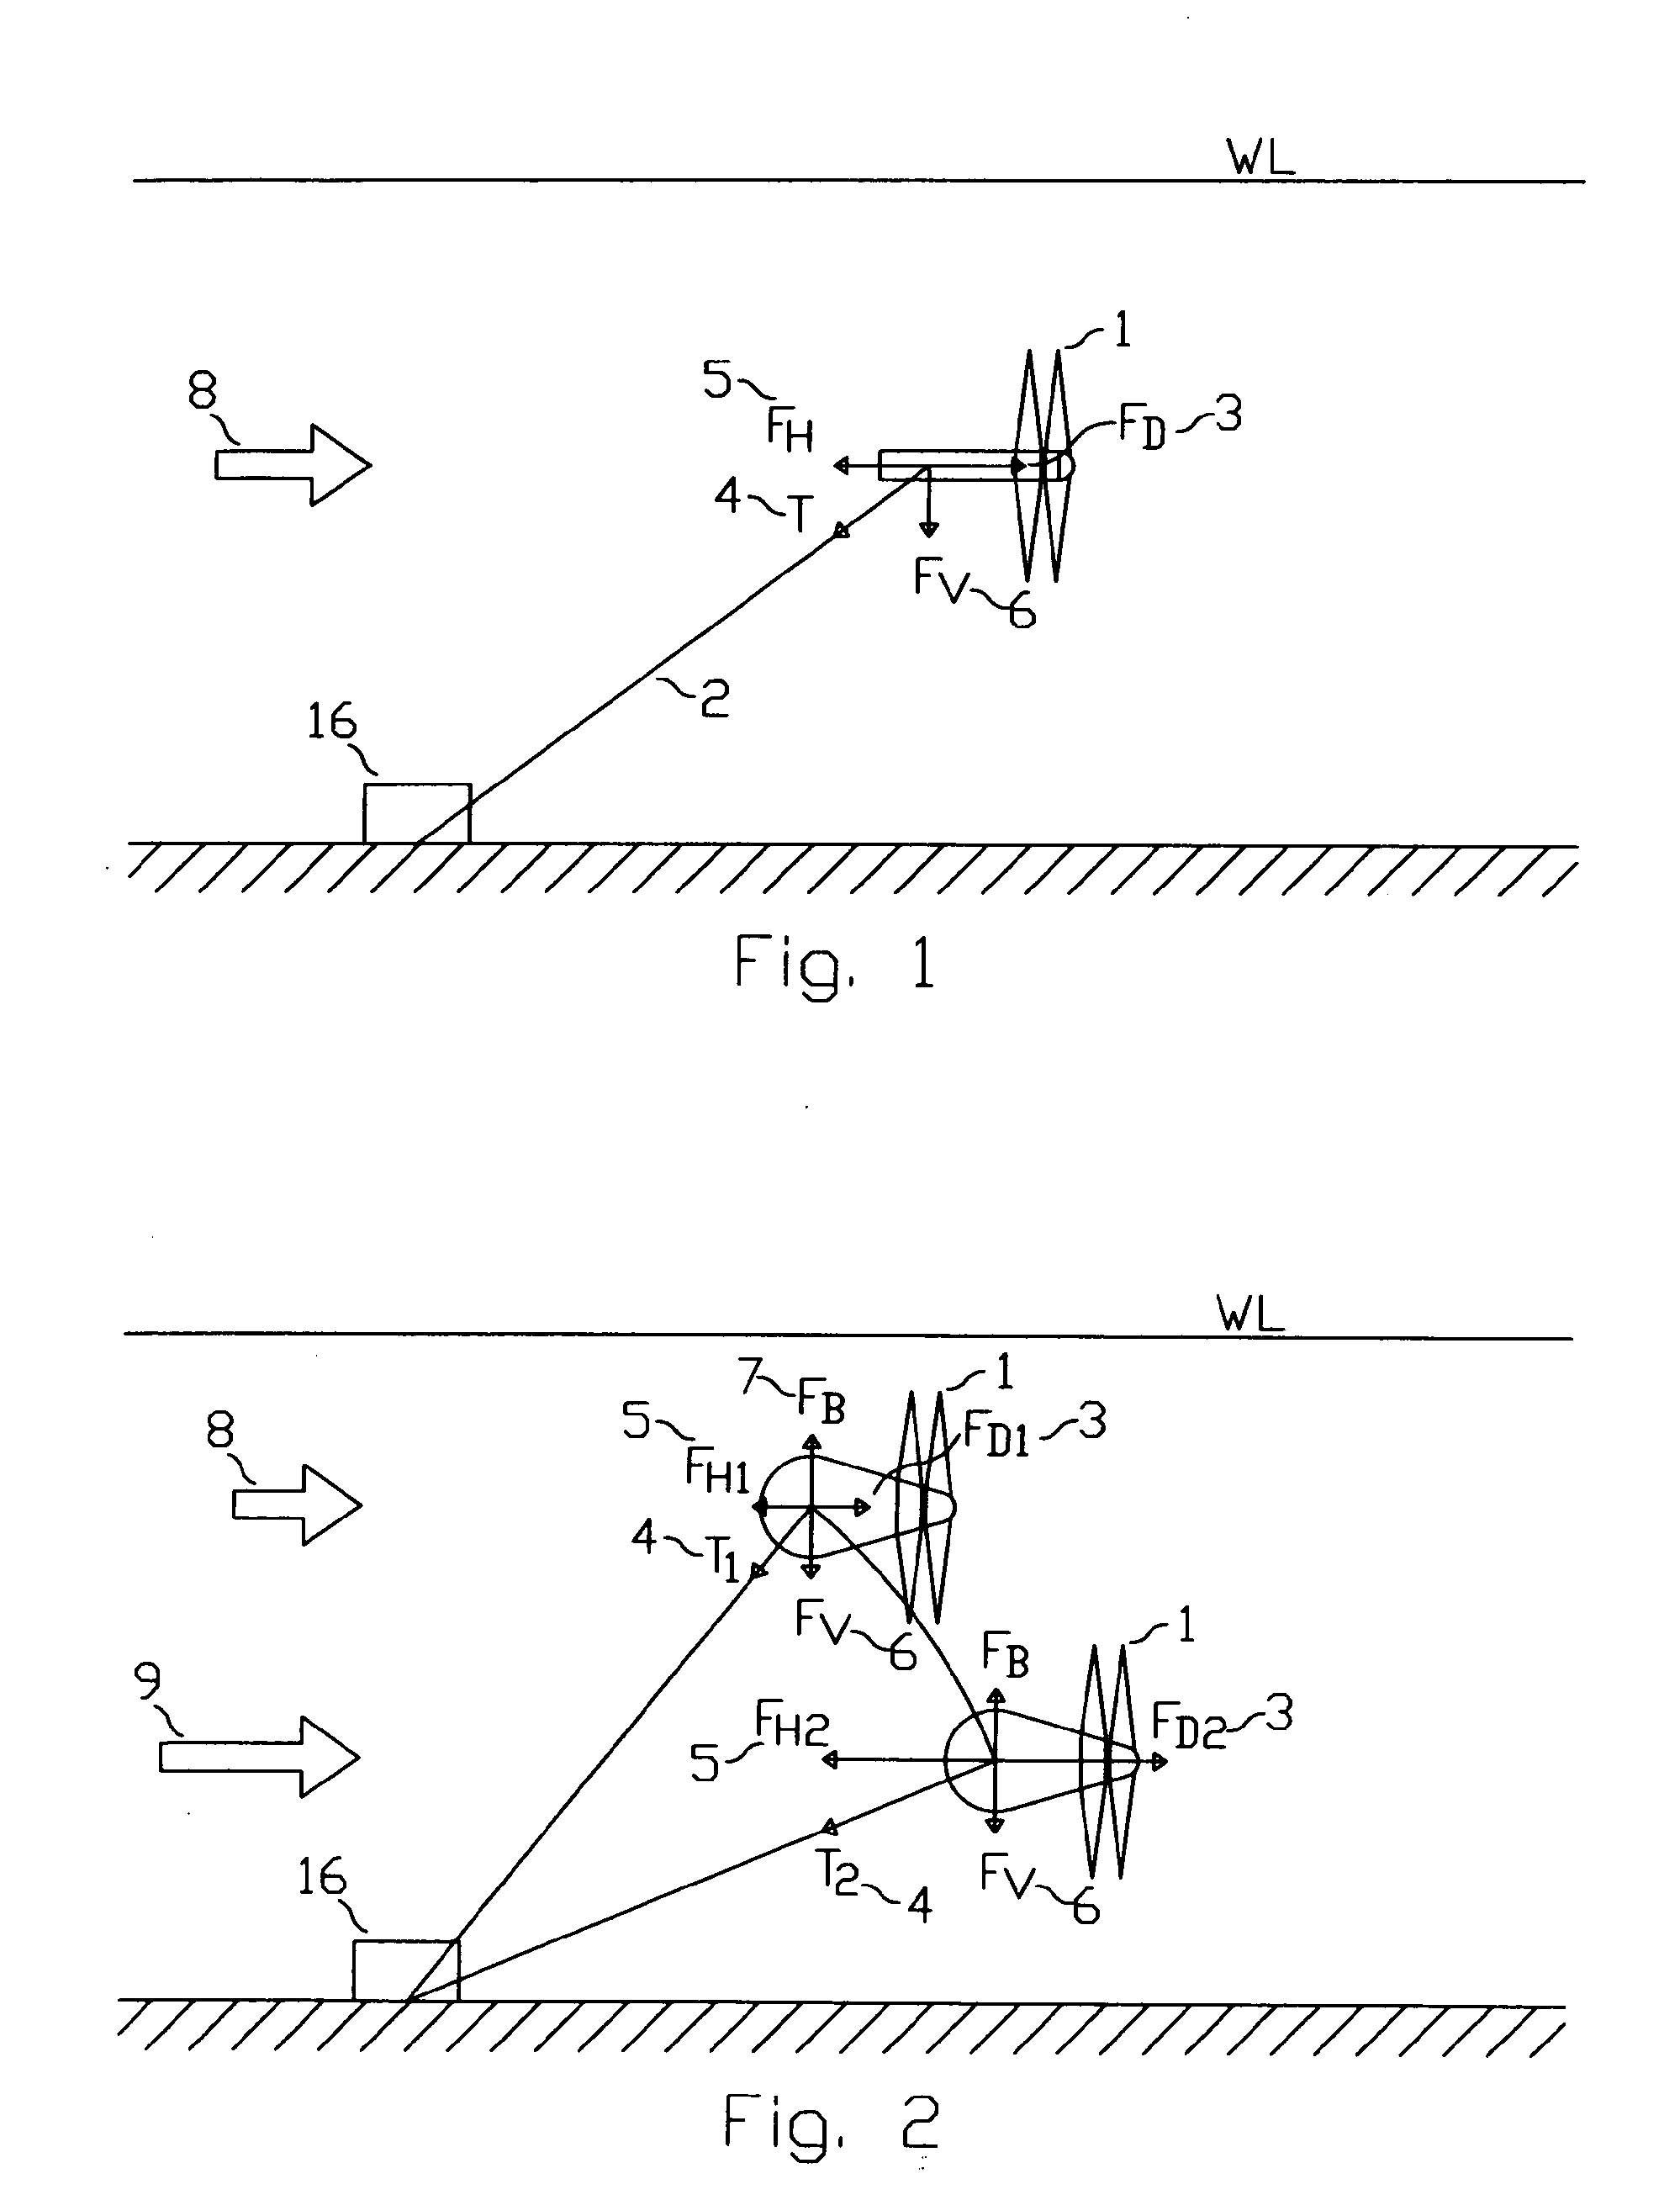 Mooring System for Tidal Stream and Ocean Current Turbines